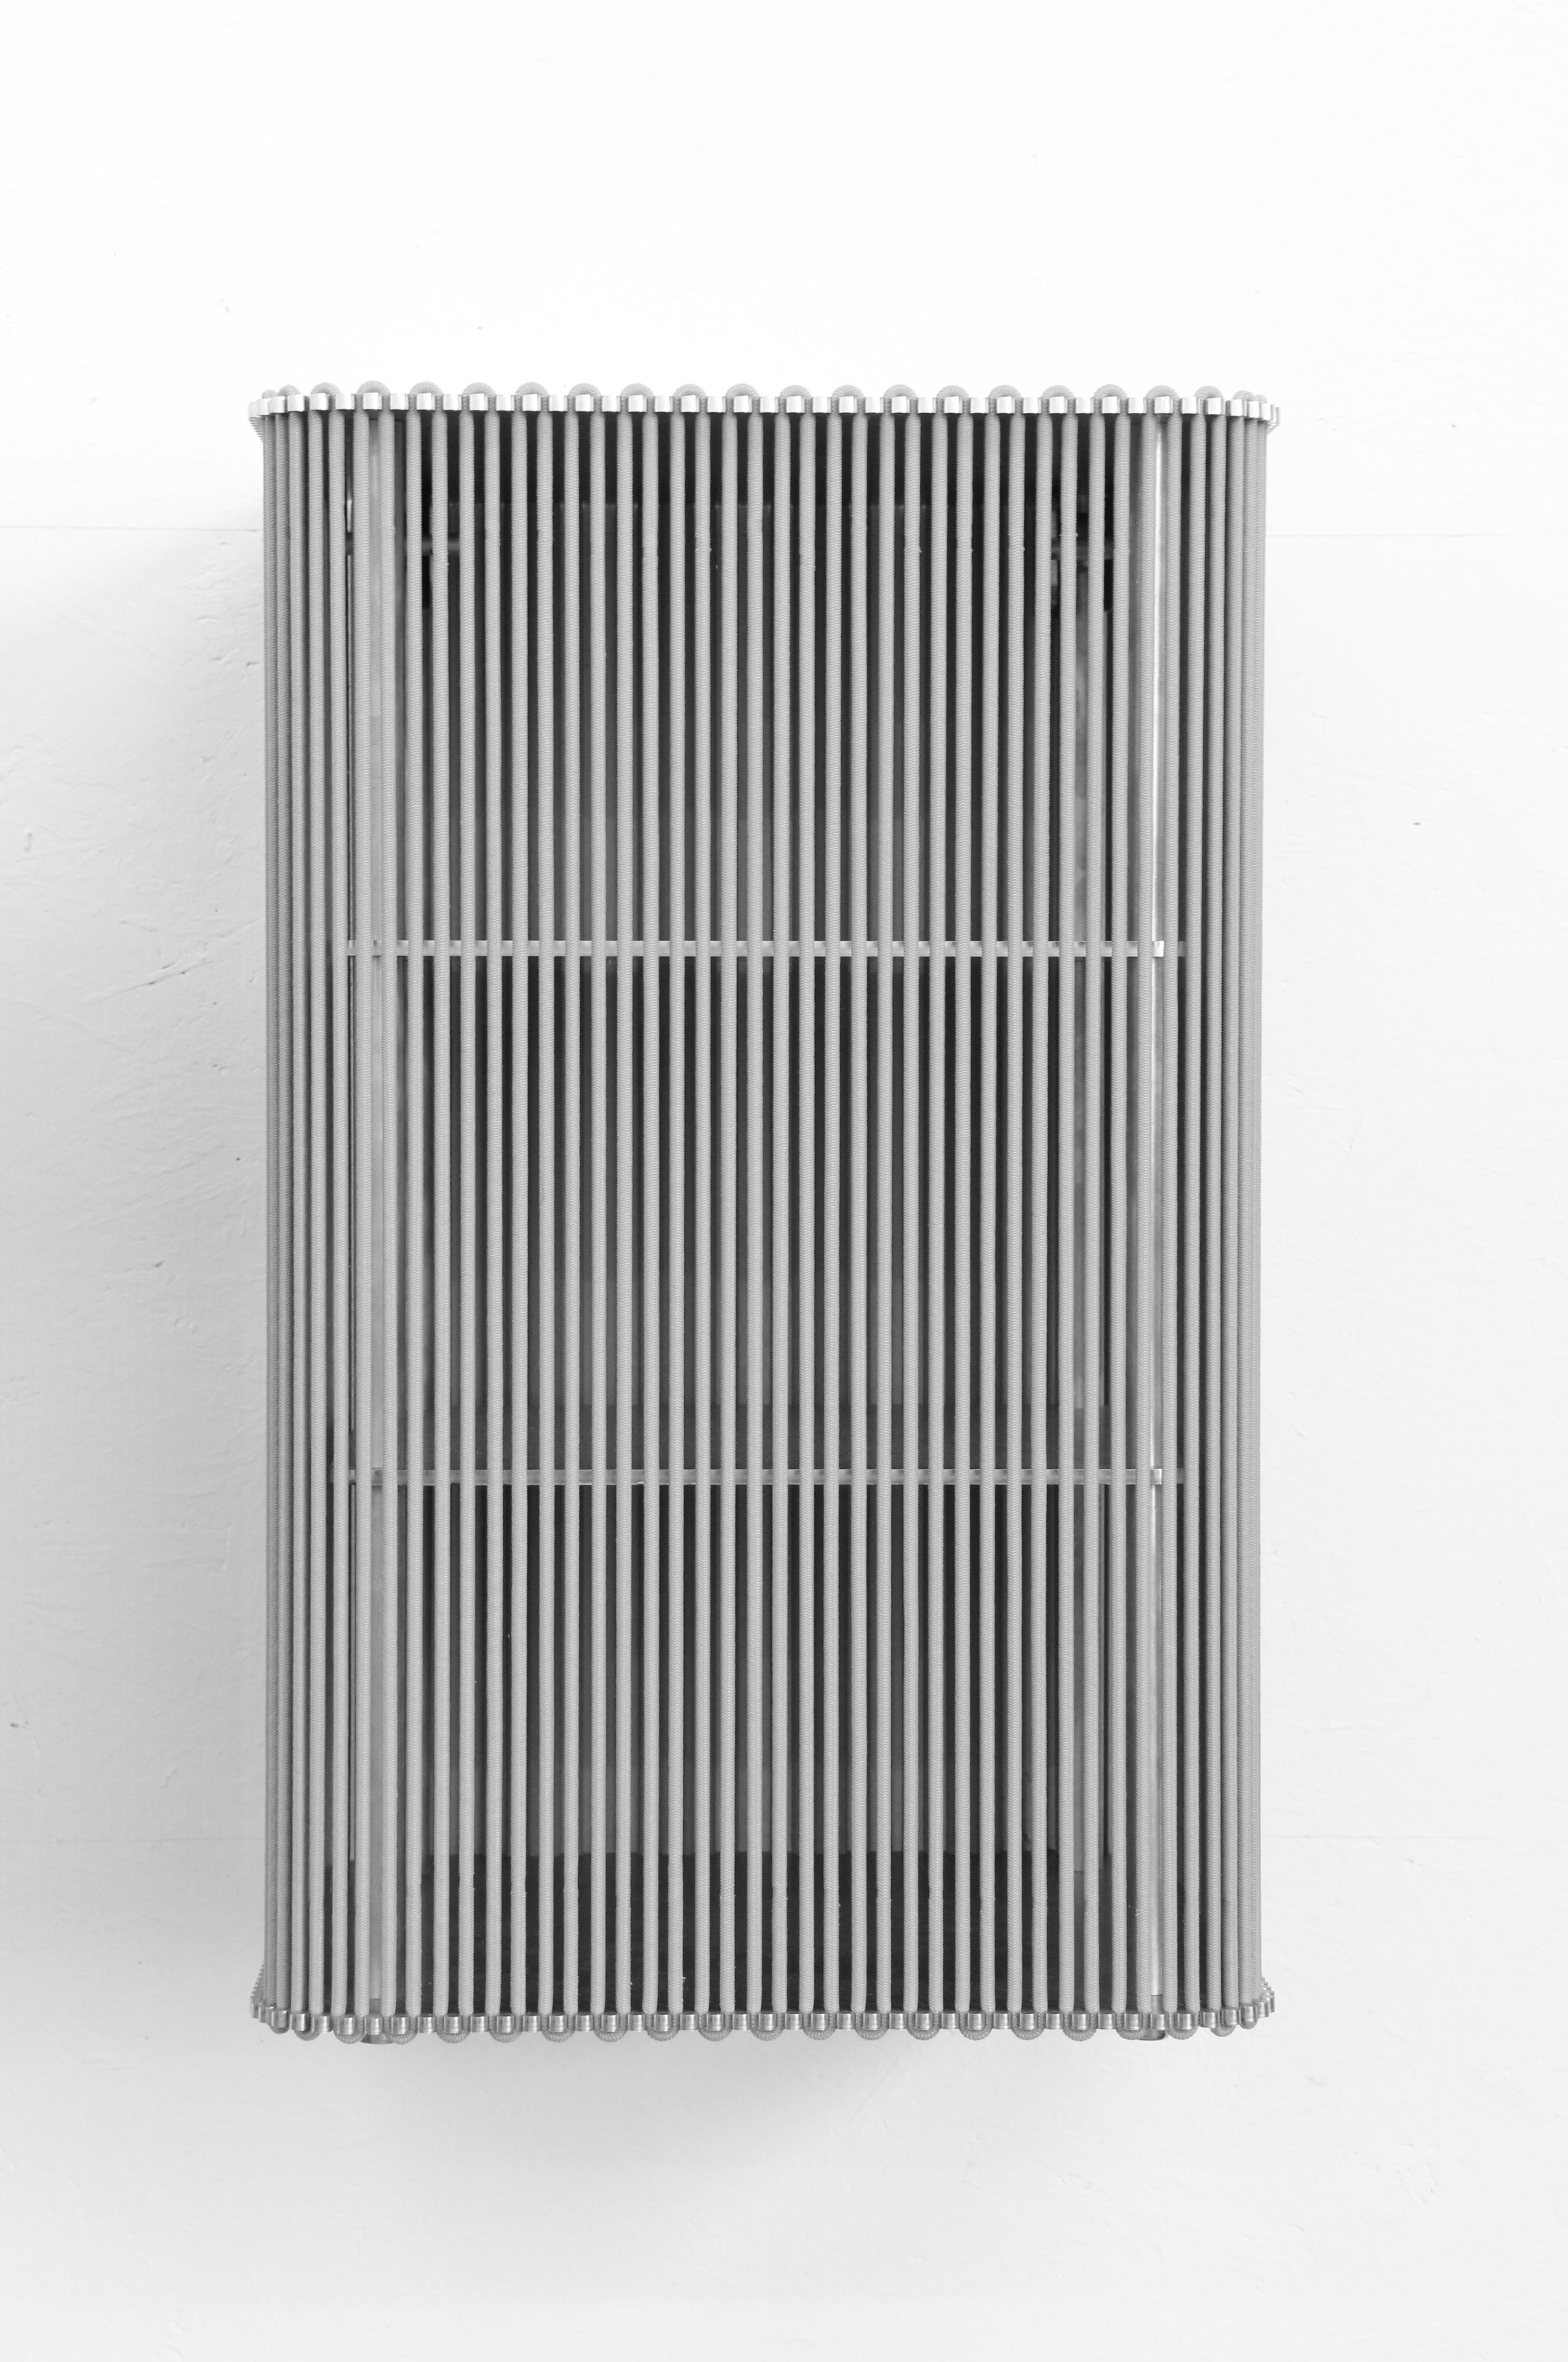 Coil square cabinet wall mounted/ side table by Bram Kerkhofs
Dimensions: D 40 x W 40 x H 75.2cm
Materials: Stainless steel, aluminium, elastic rope (natural rubber, polyethylene).

Other dimensions are available.

COIL is a modular cabinet